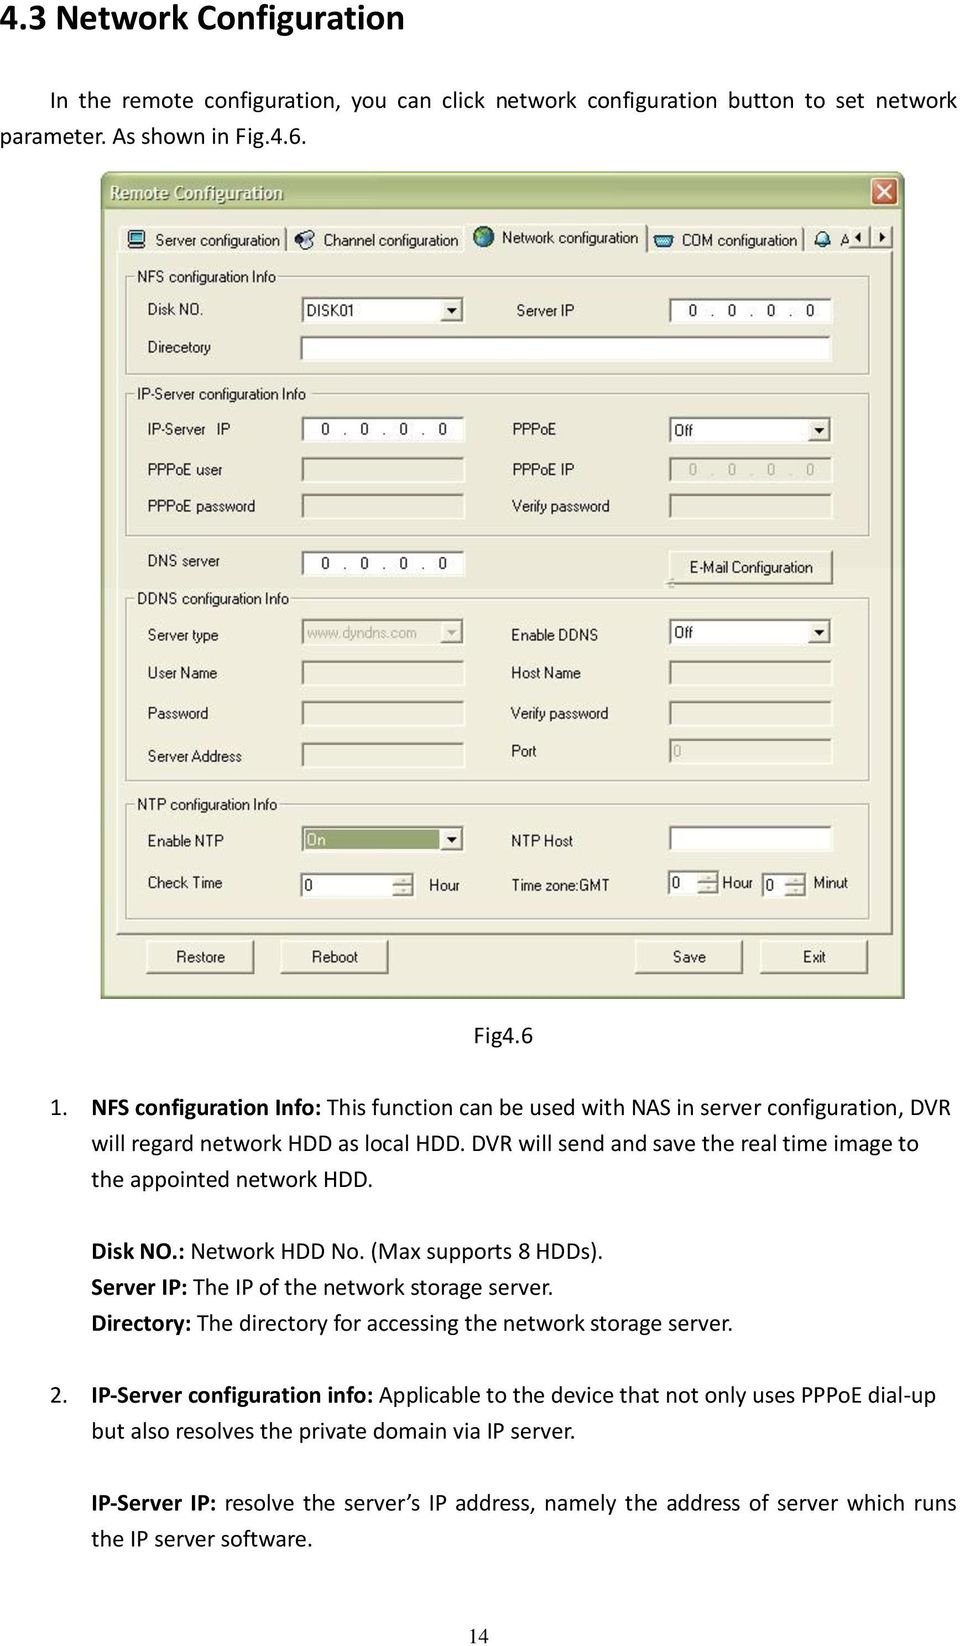 DVR will send and save the real time image to the appointed network HDD. Disk NO.: Network HDD No. (Max supports 8 HDDs). Server IP: The IP of the network storage server.